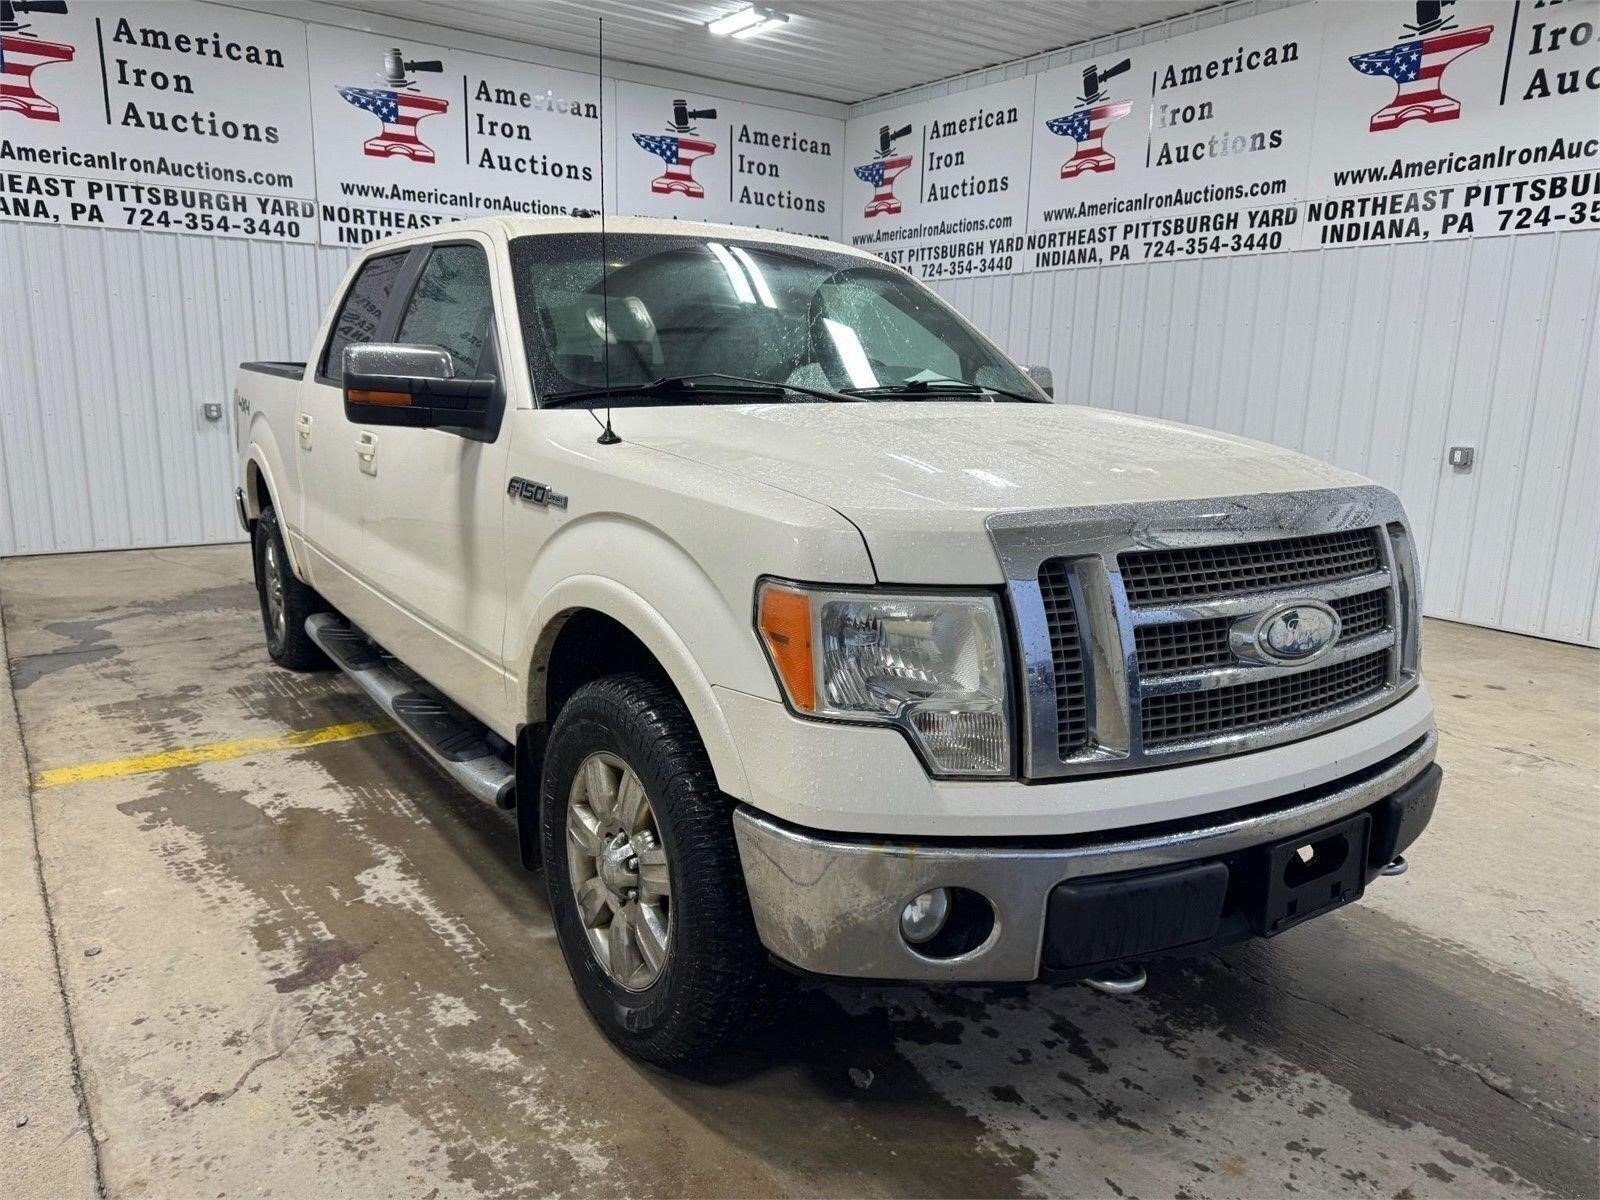 2009 Ford F 150 Truck - Titled -NO RESERVE